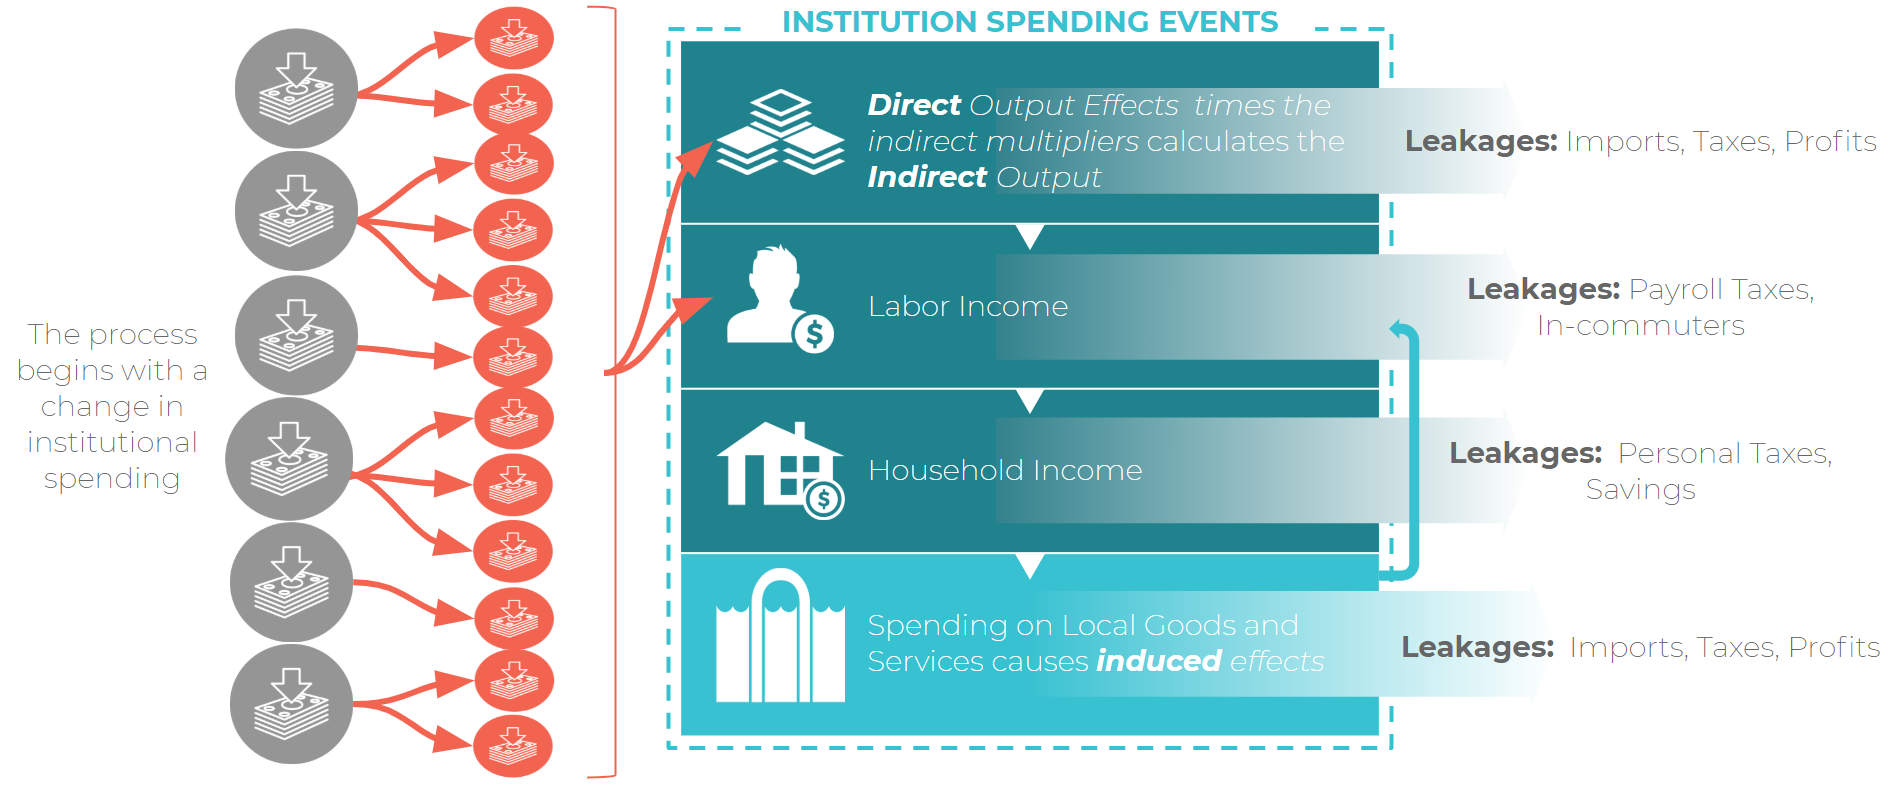 institution_spending_events.png